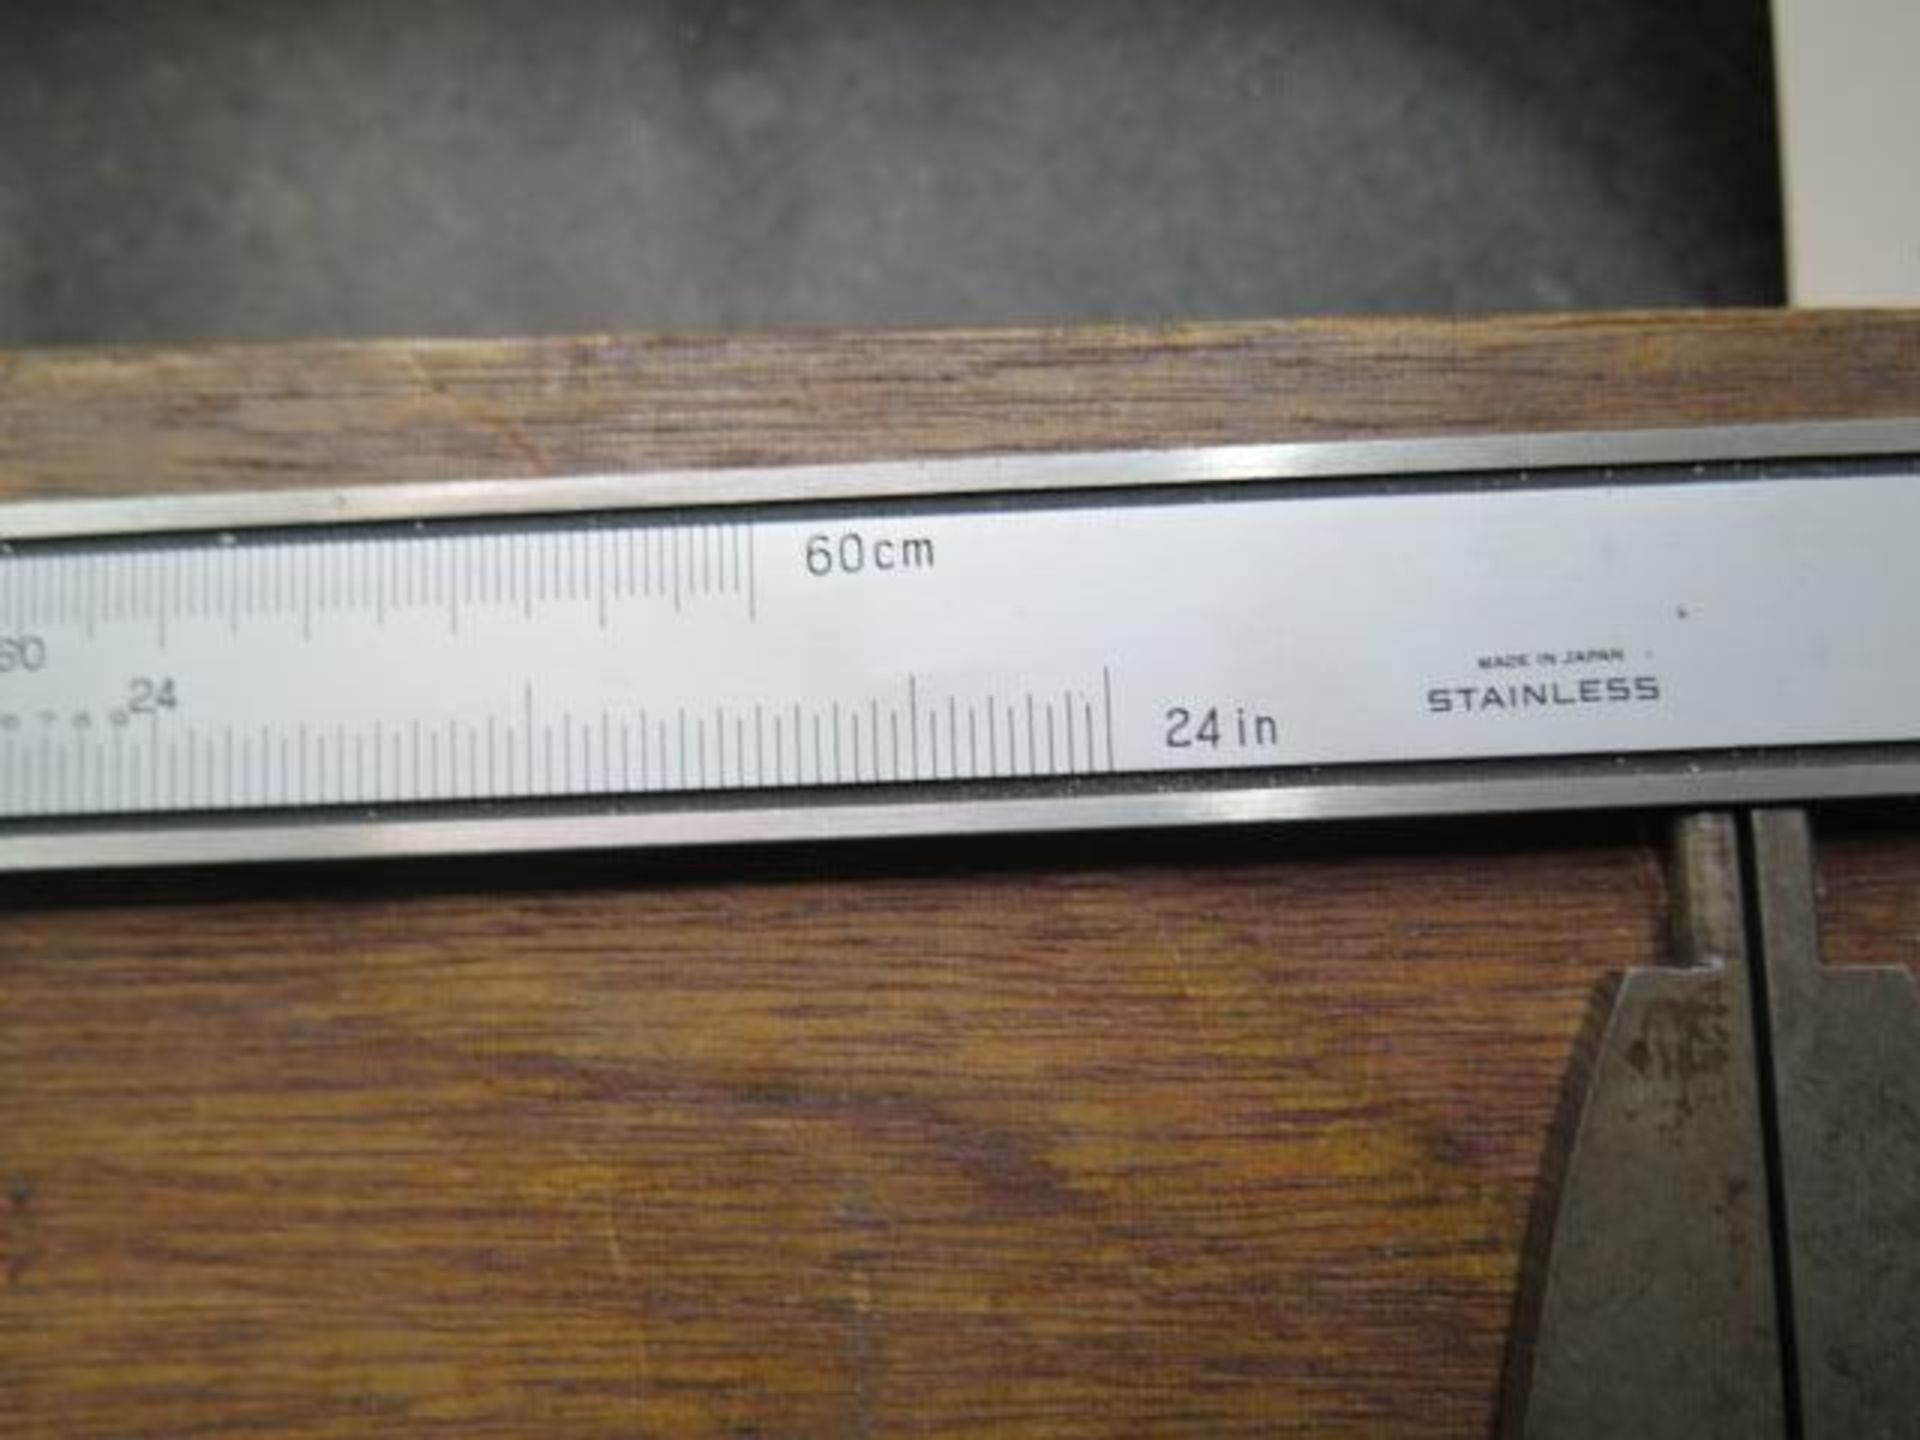 Kanon and Stalex 24" Vernier Calipers (2) (SOLD AS-IS - NO WARRANTY) - Image 4 of 4